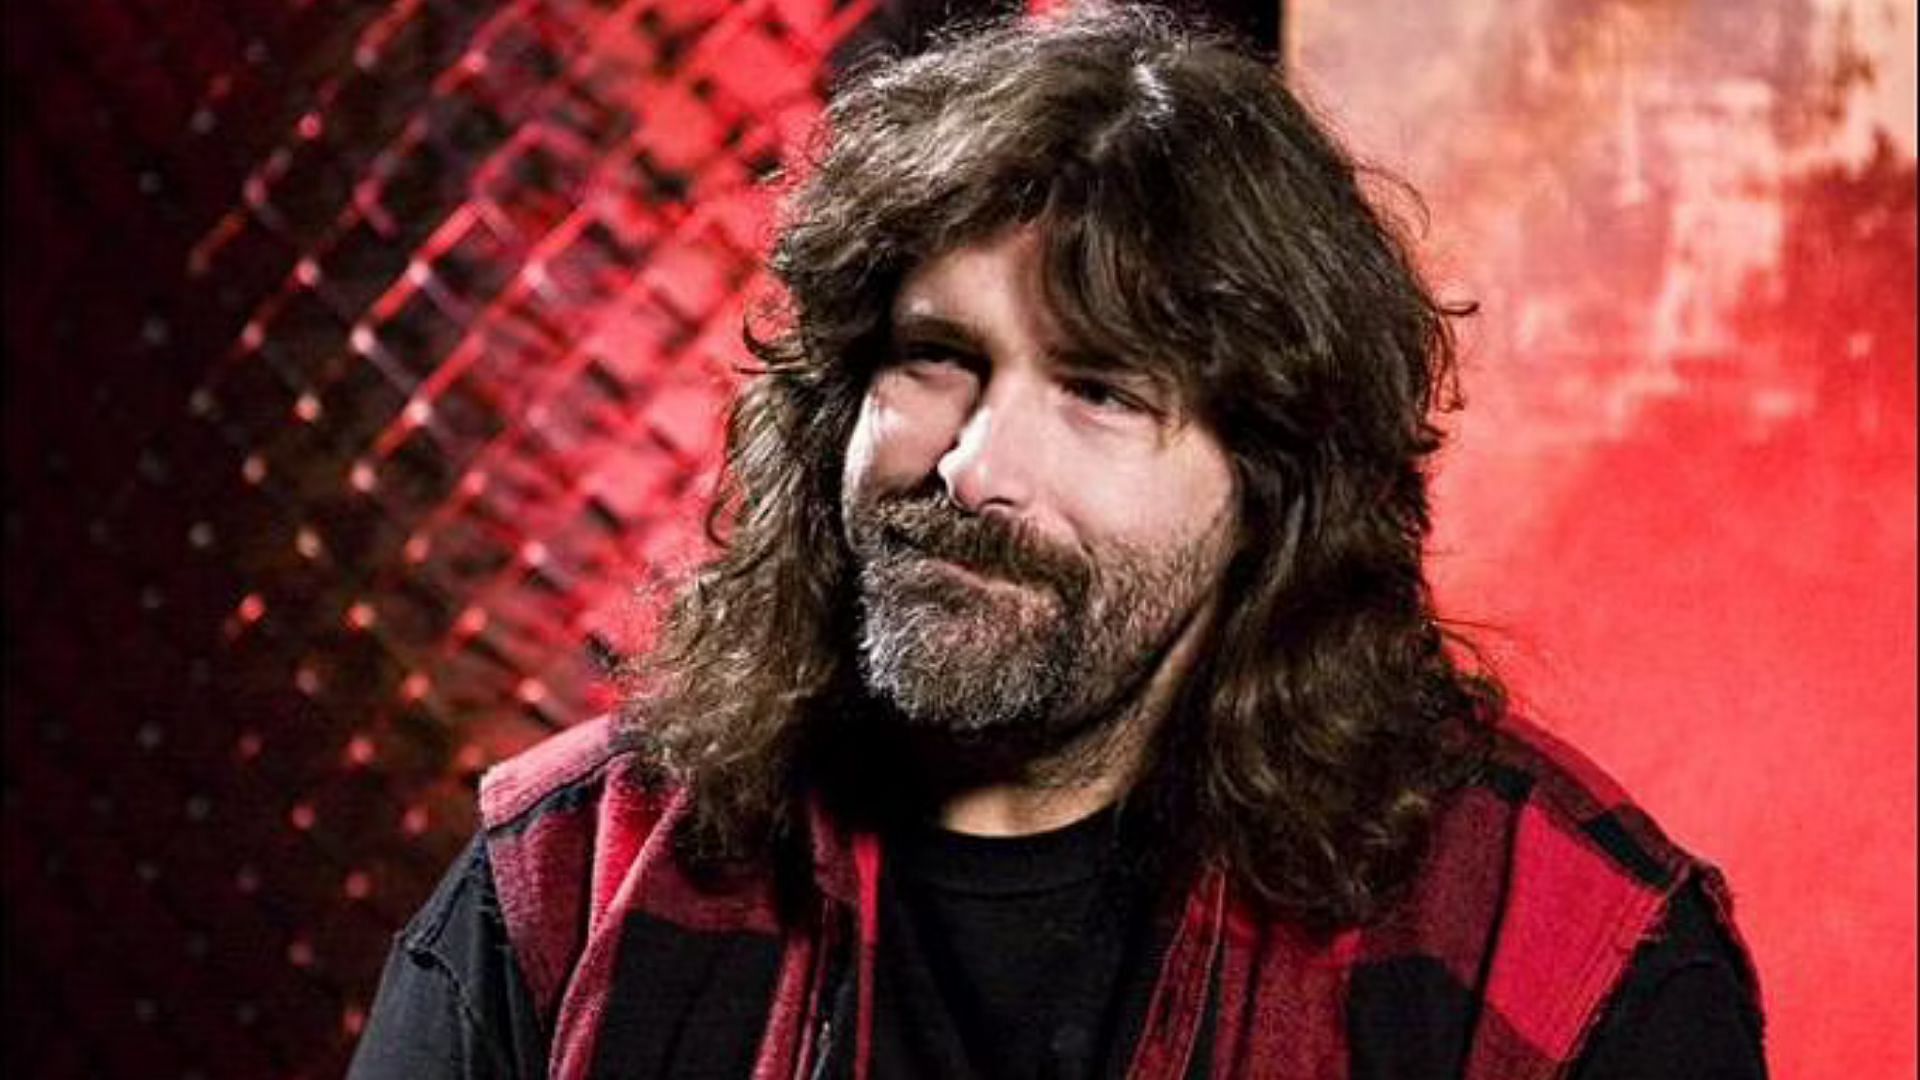 Foley was the inaugural Hardcore champion in WWE